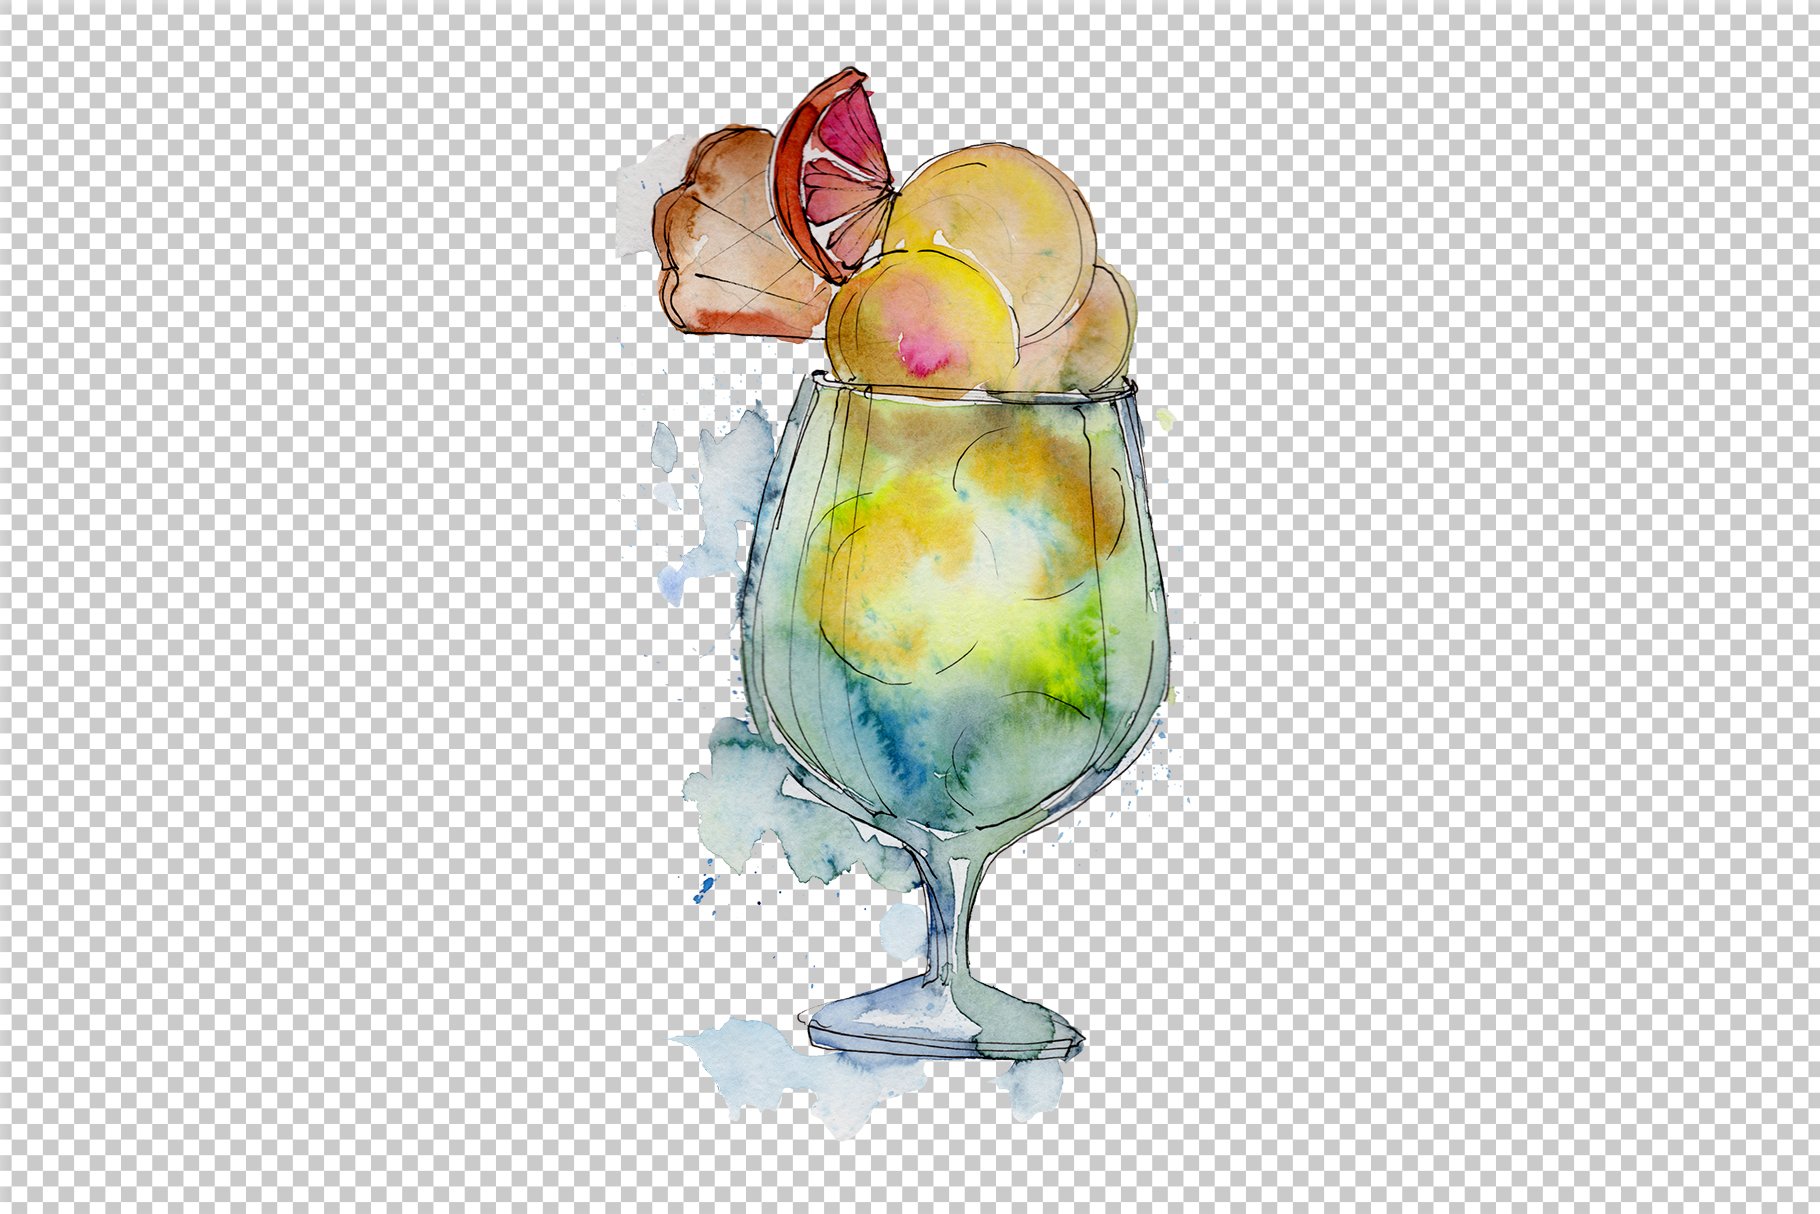 So colorful glass of the ice cream on the transparent background.